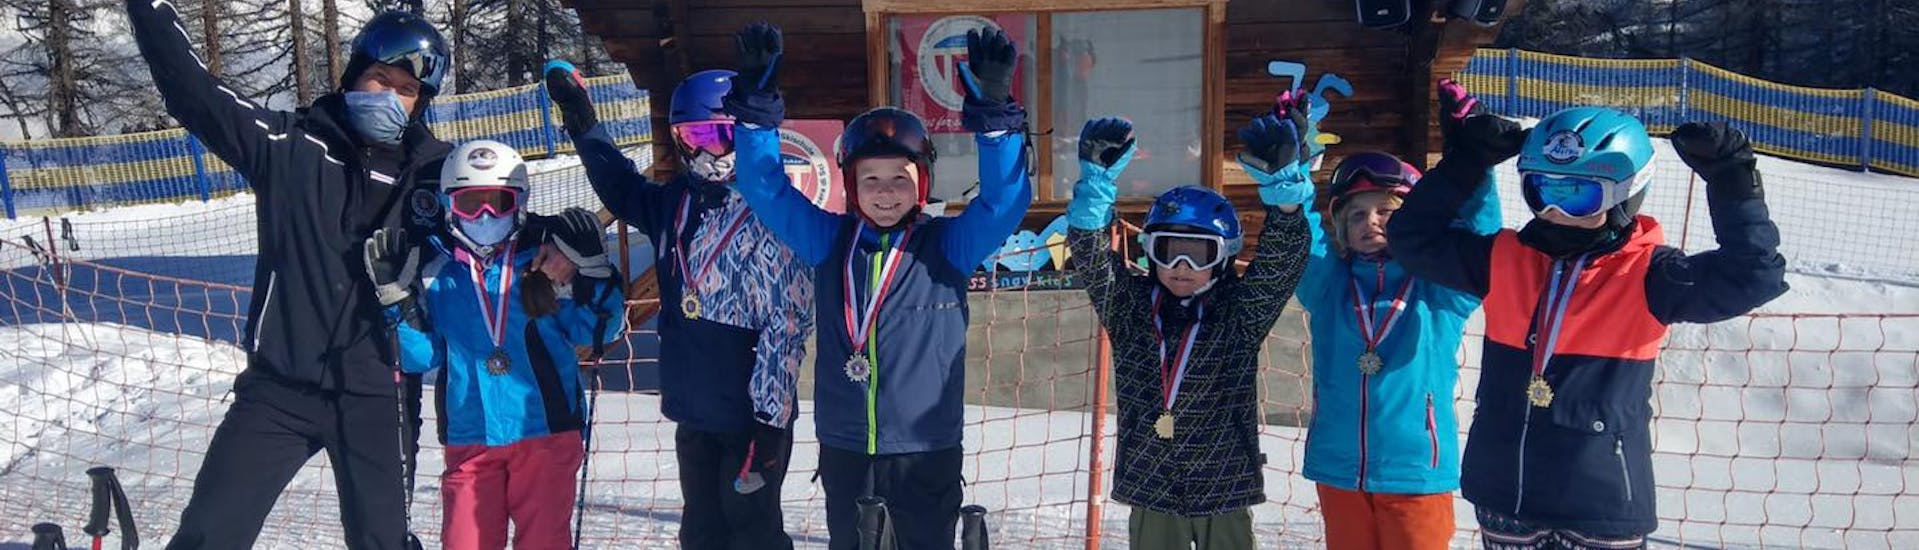 After the race, the kids are happy about their medals at the Kids Ski Lessons (4-15 y.) for Advanced Skiers.